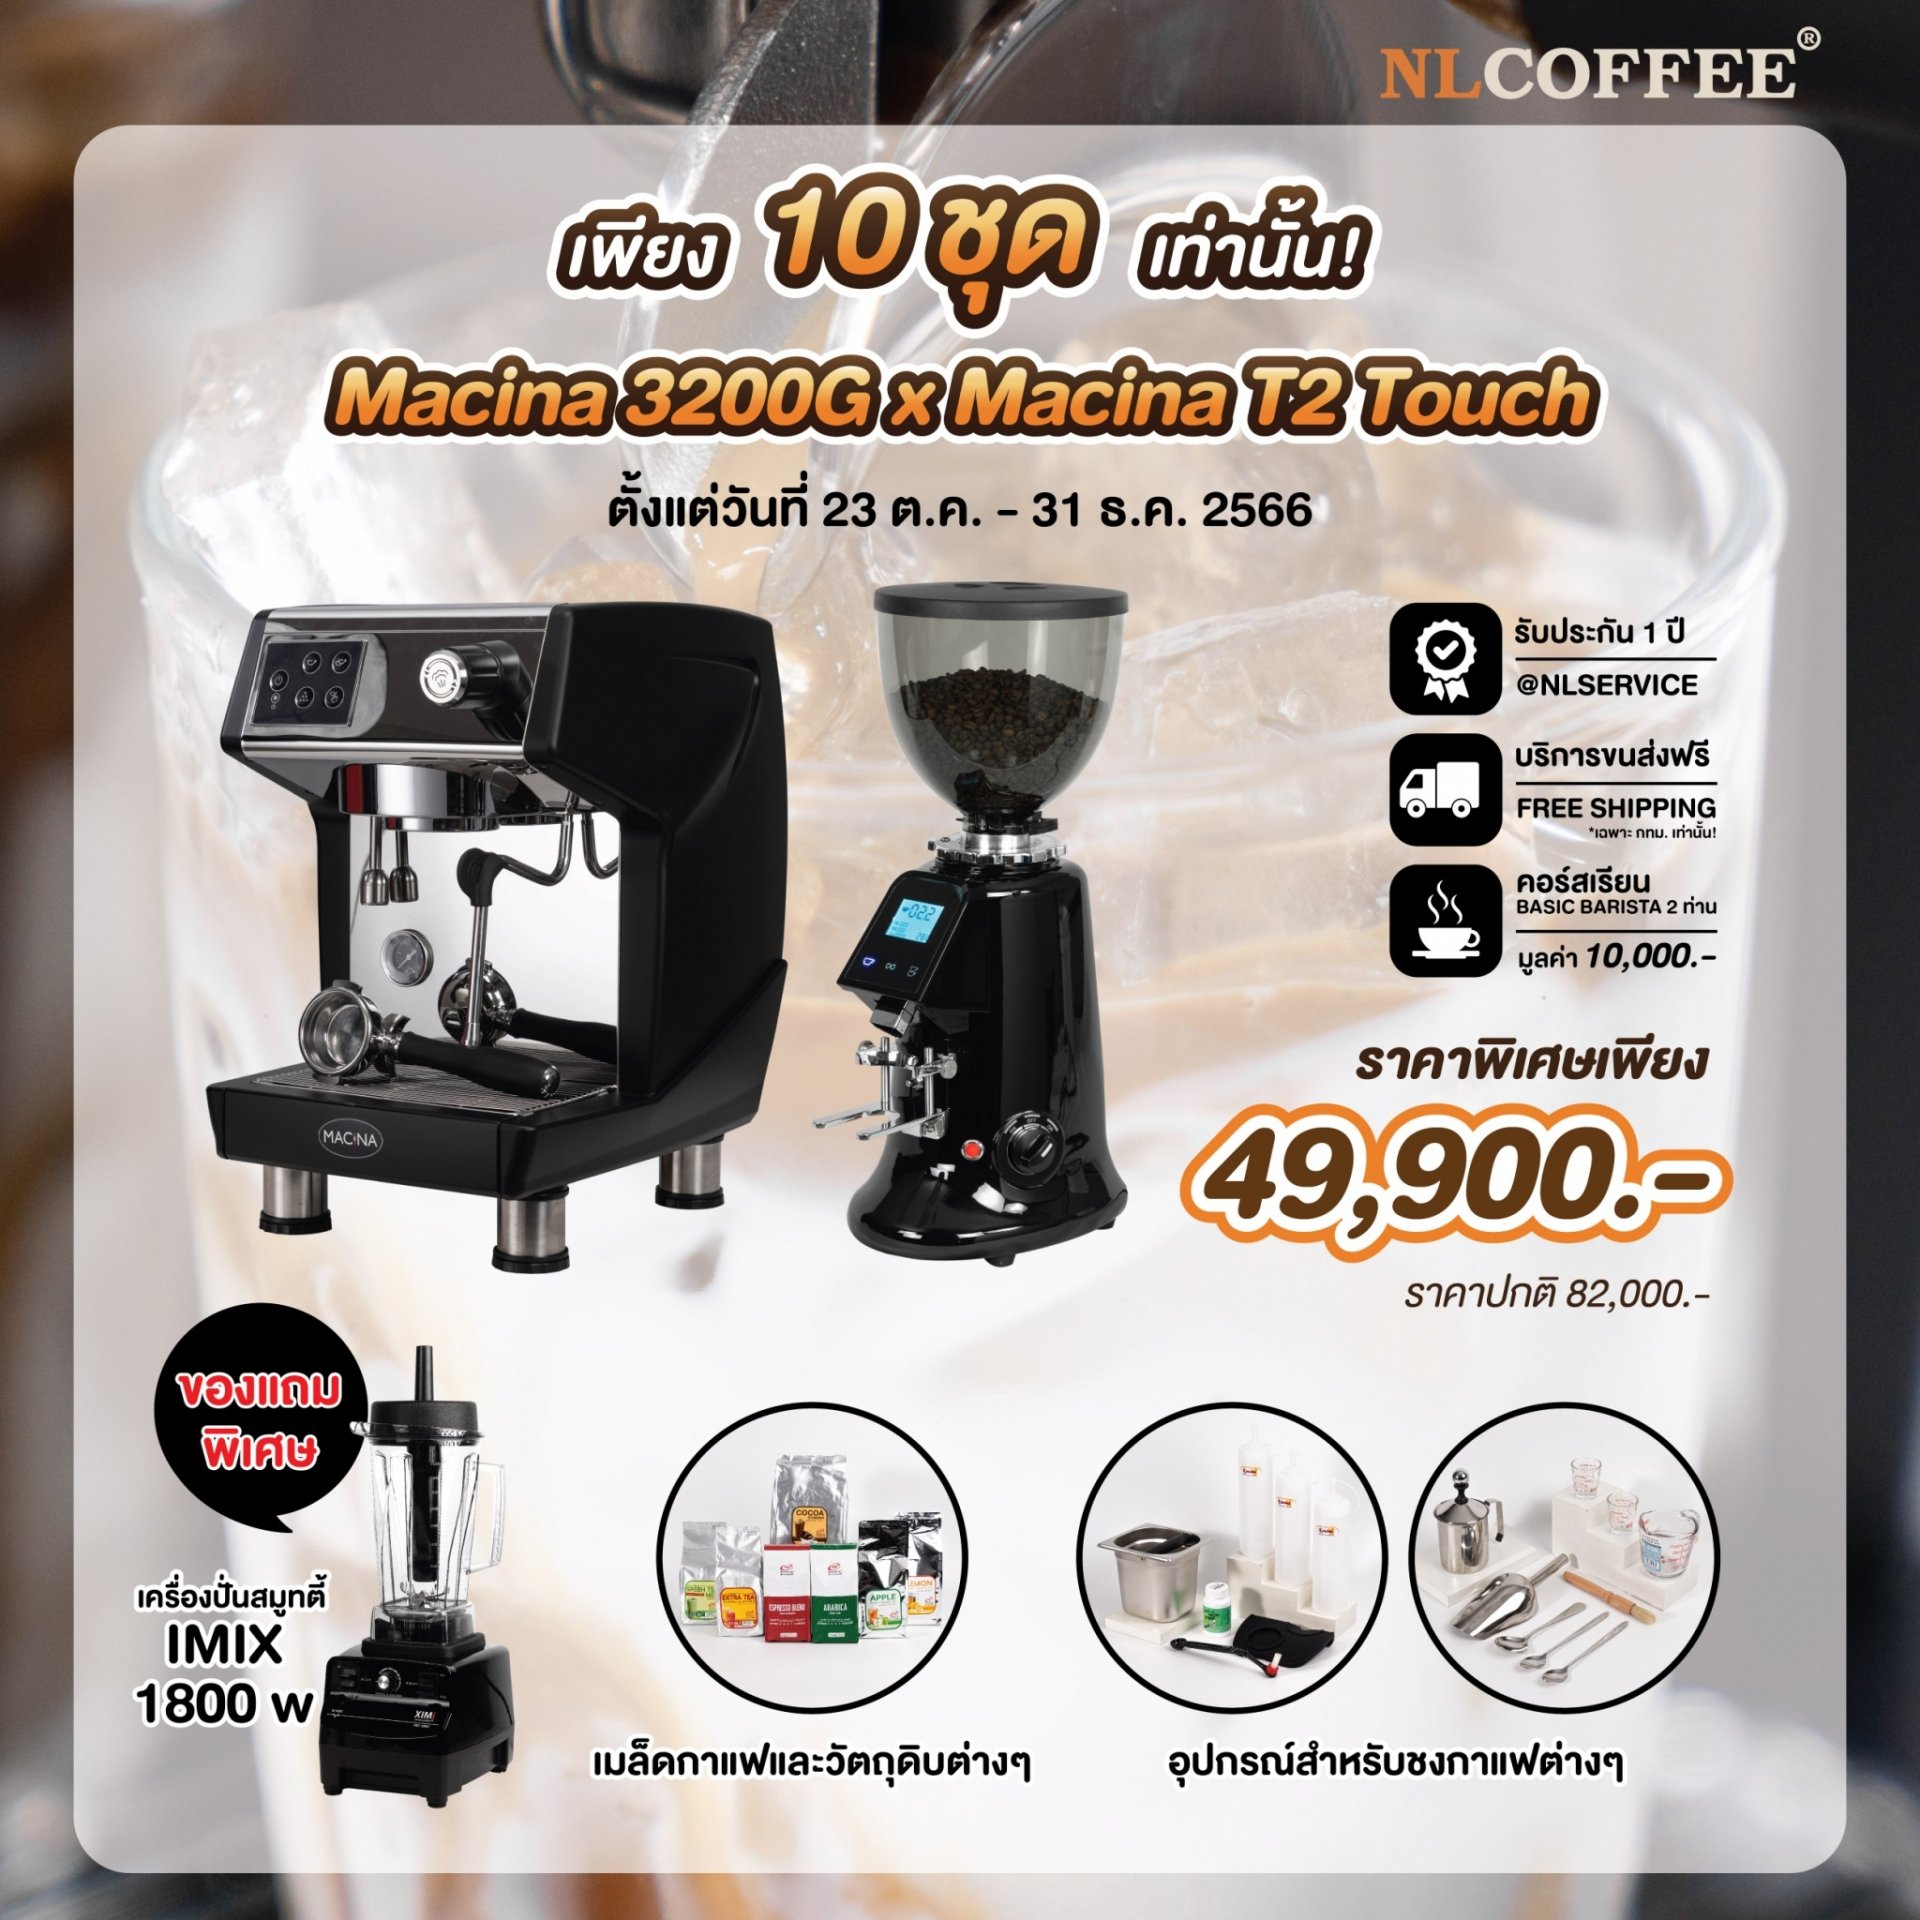 Promotion Macina 3200g+T2 Touch